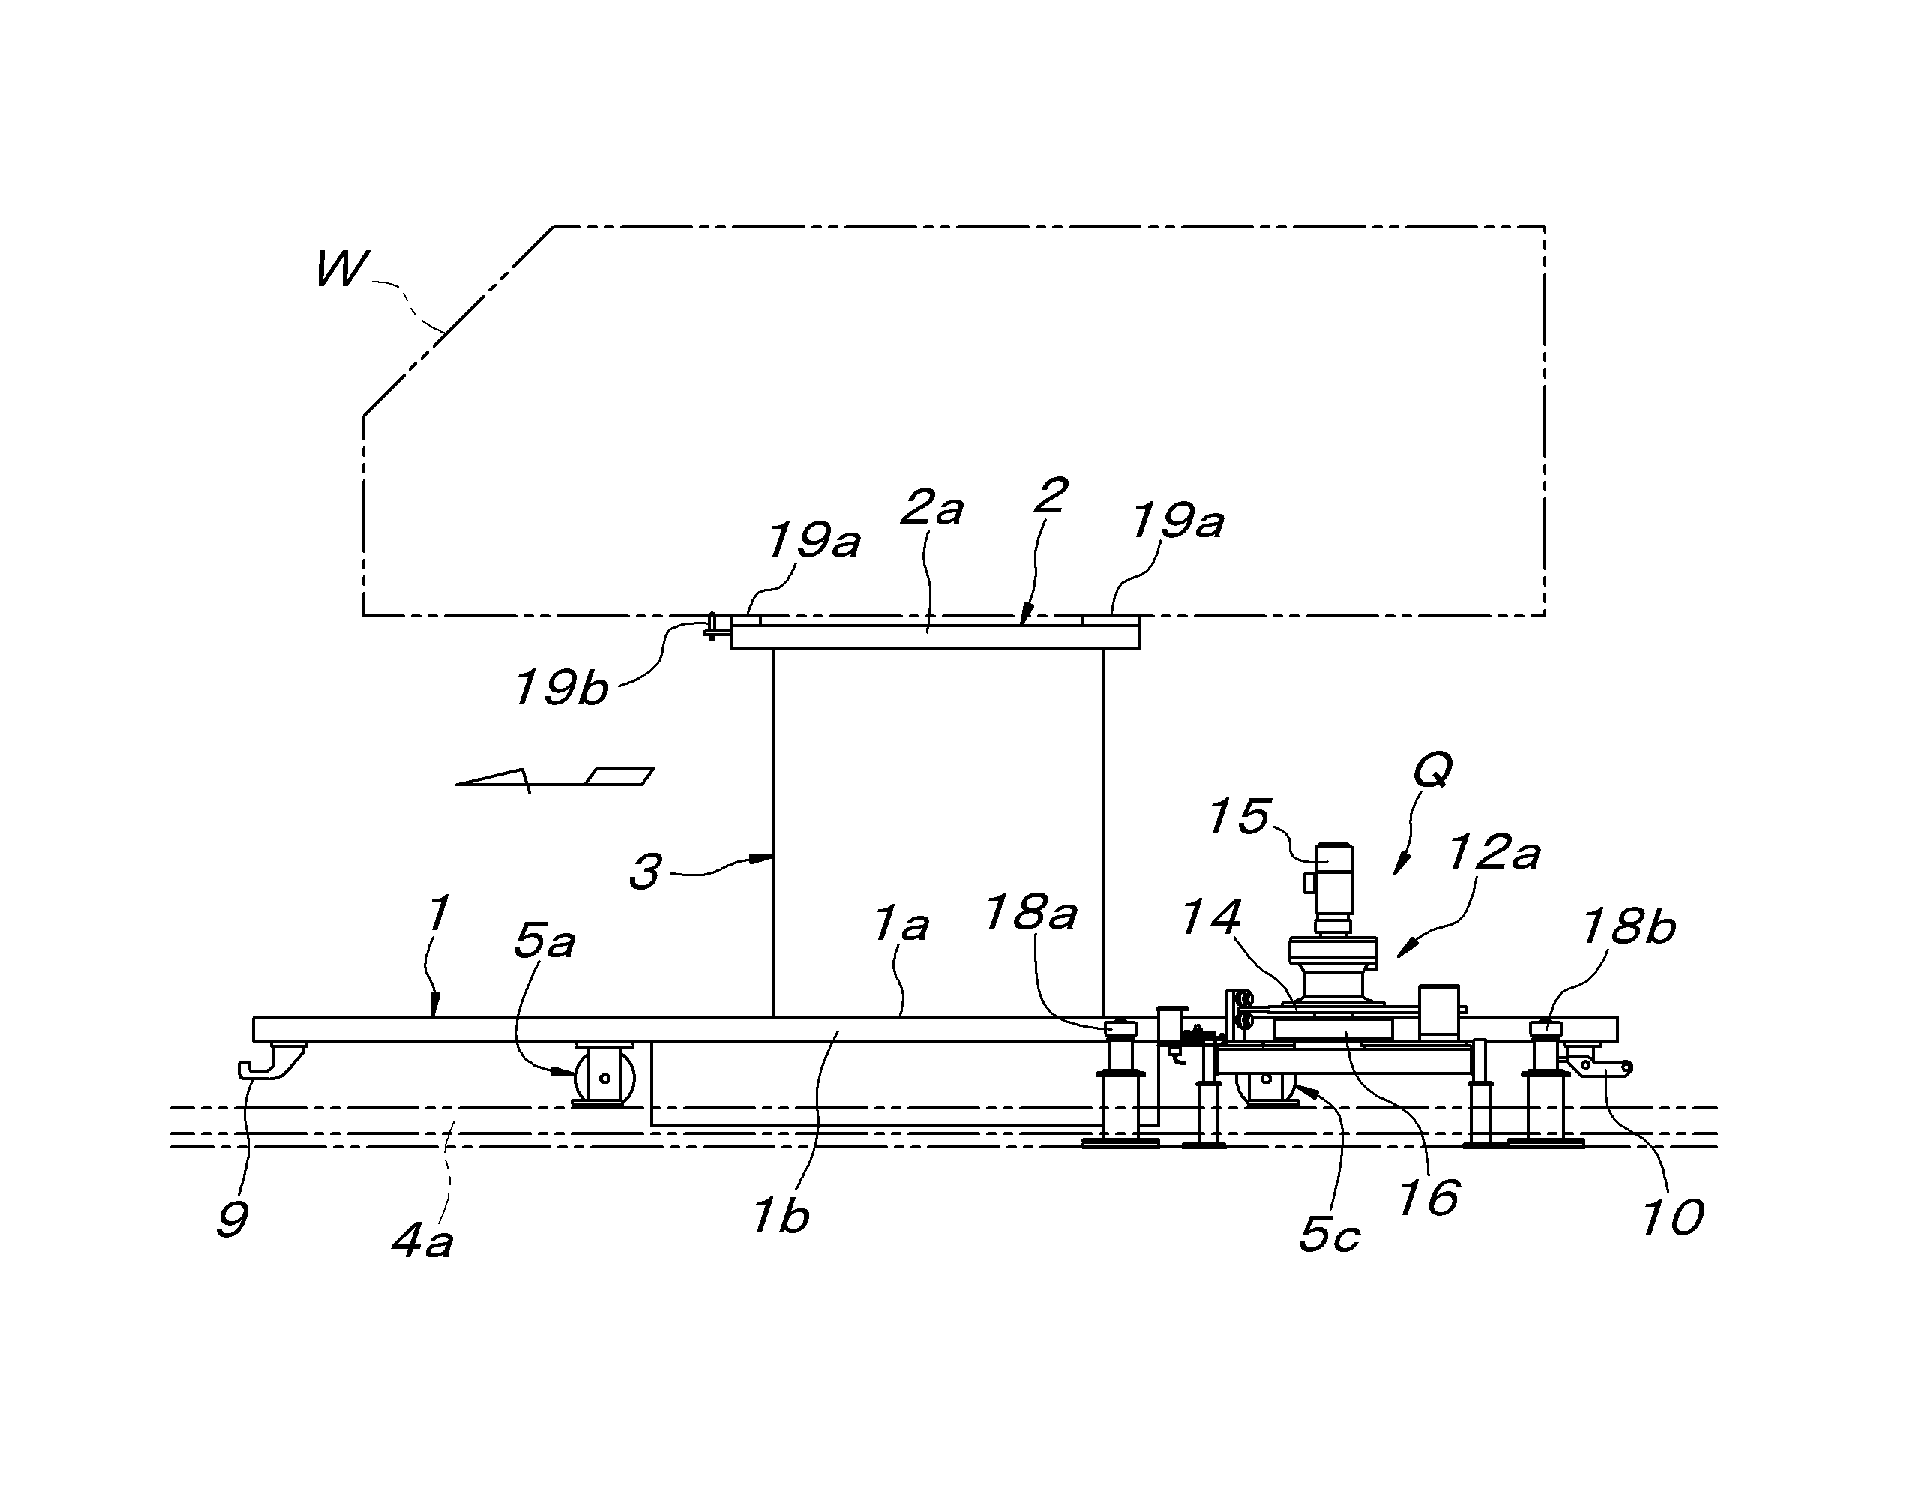 Trolley-type conveyance device